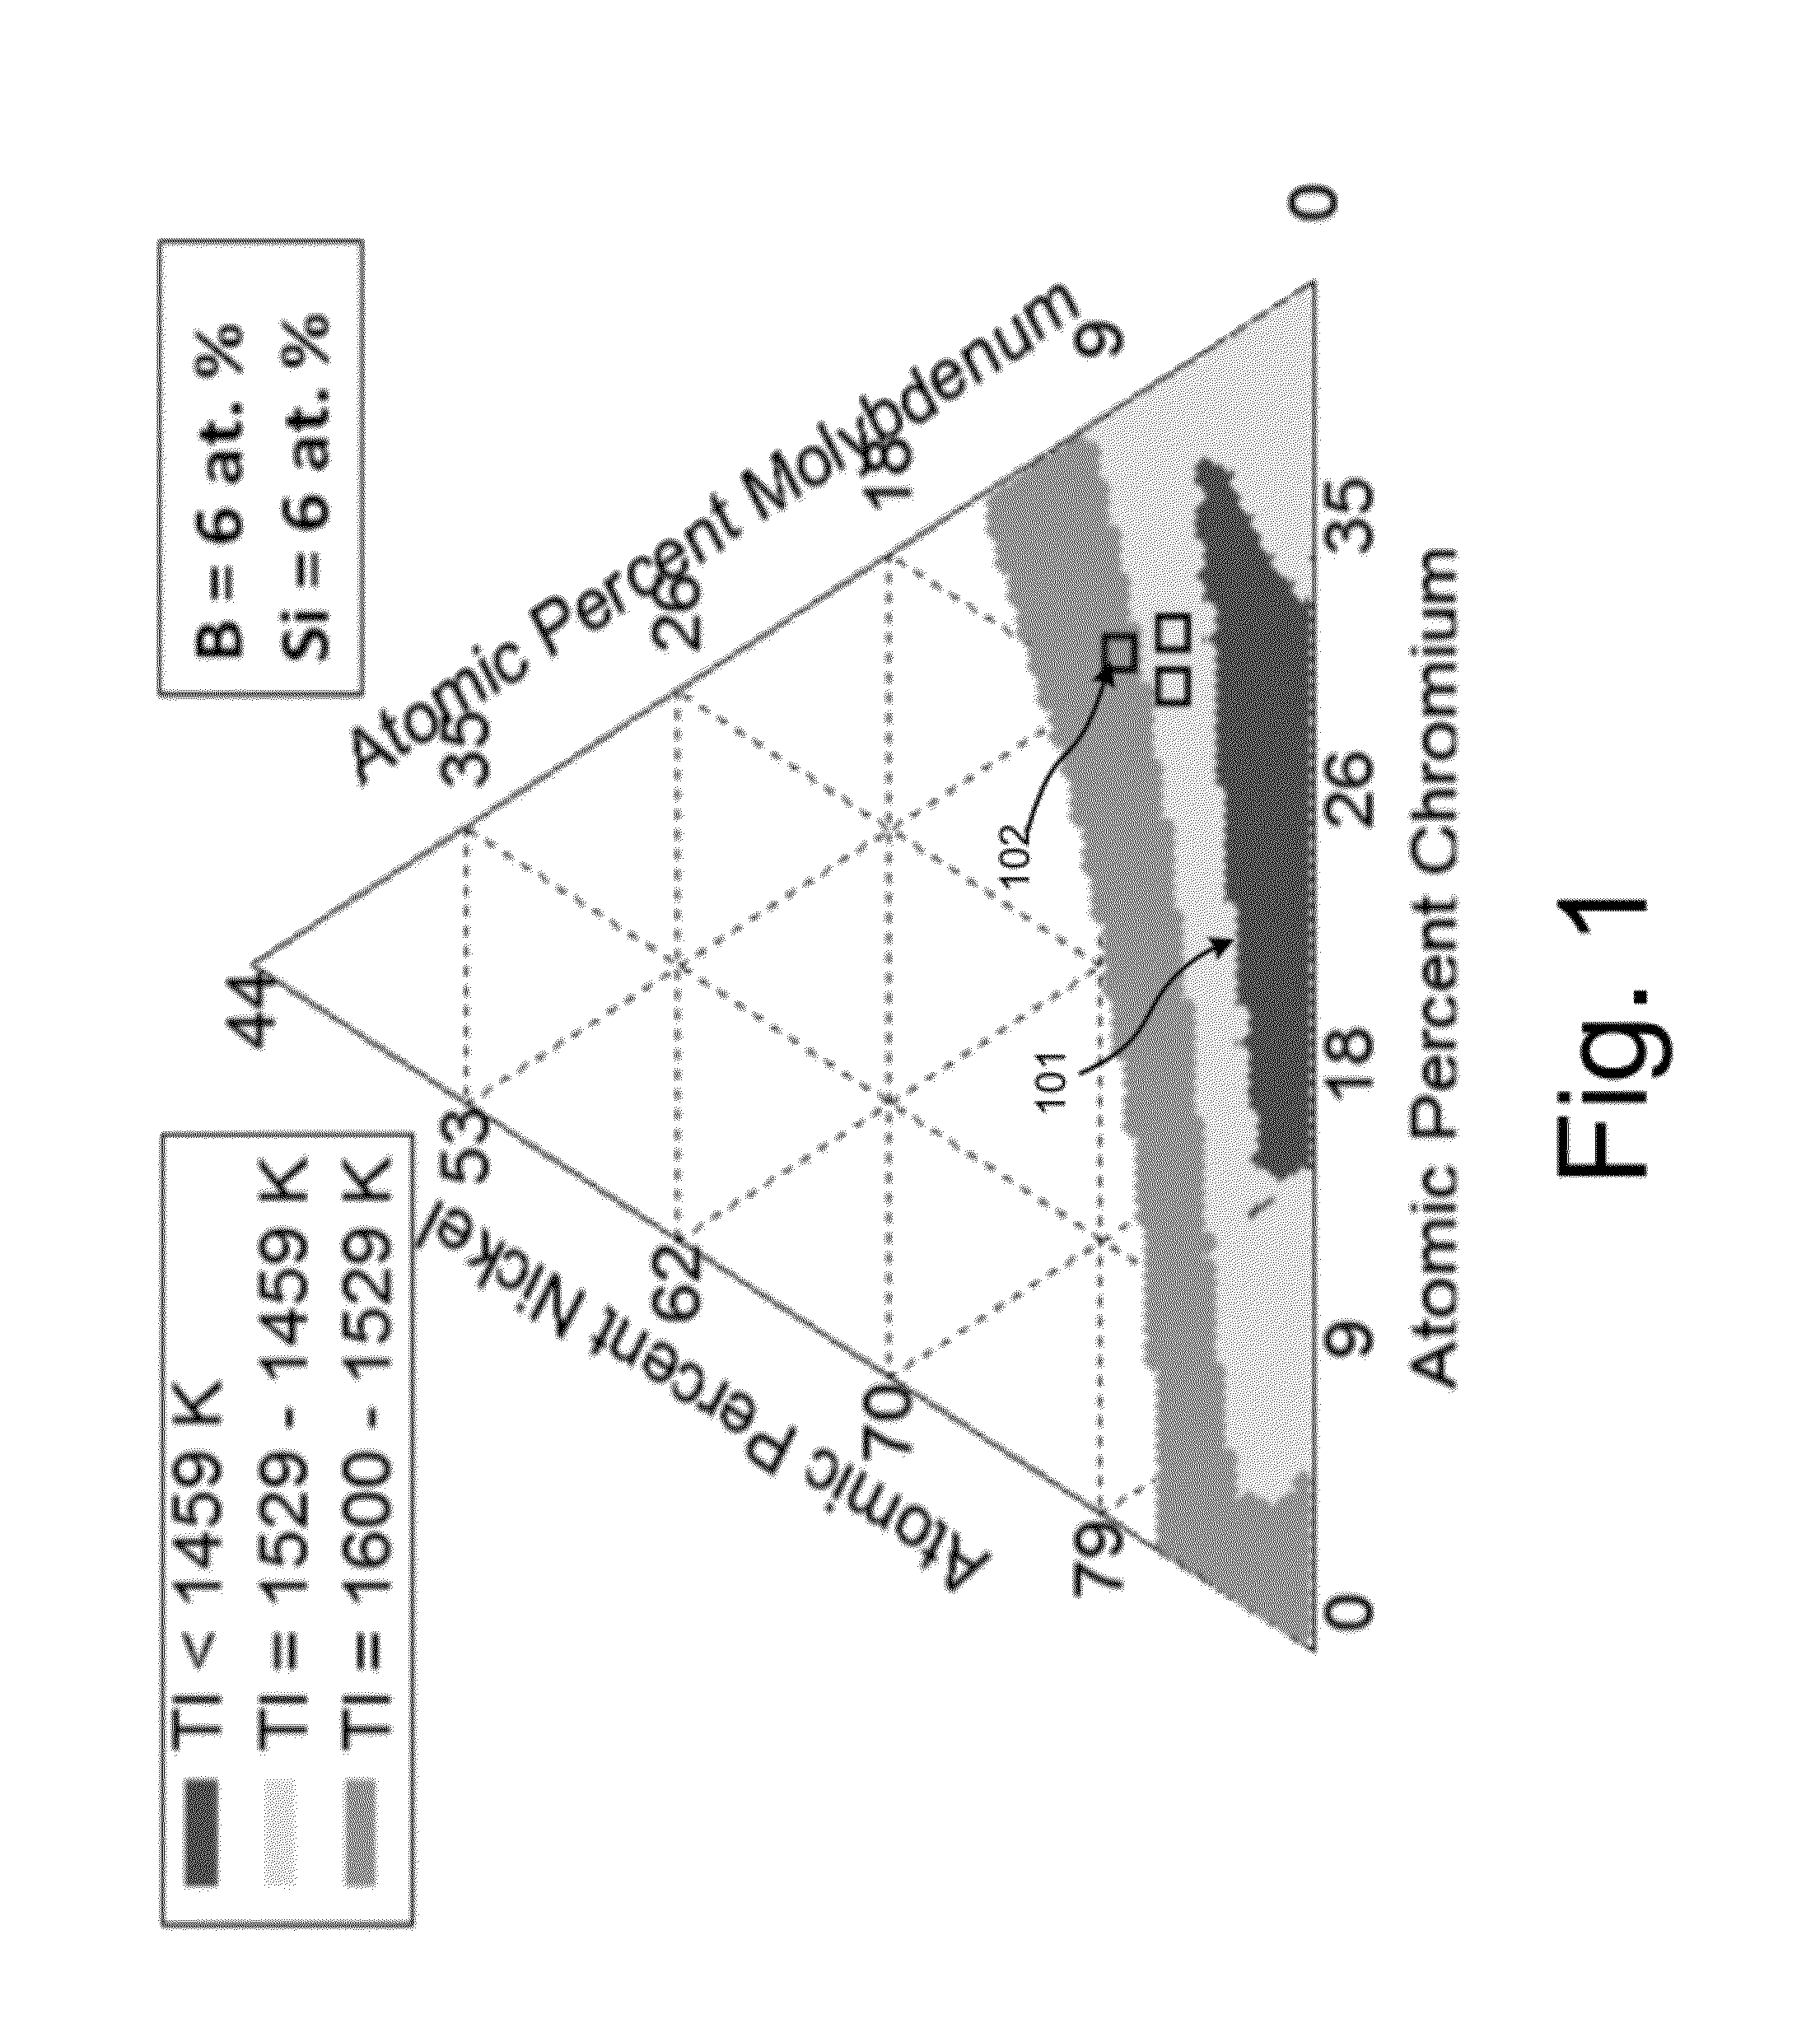 Fine grained ni-based alloys for resistance to stress corrosion cracking and methods for their design